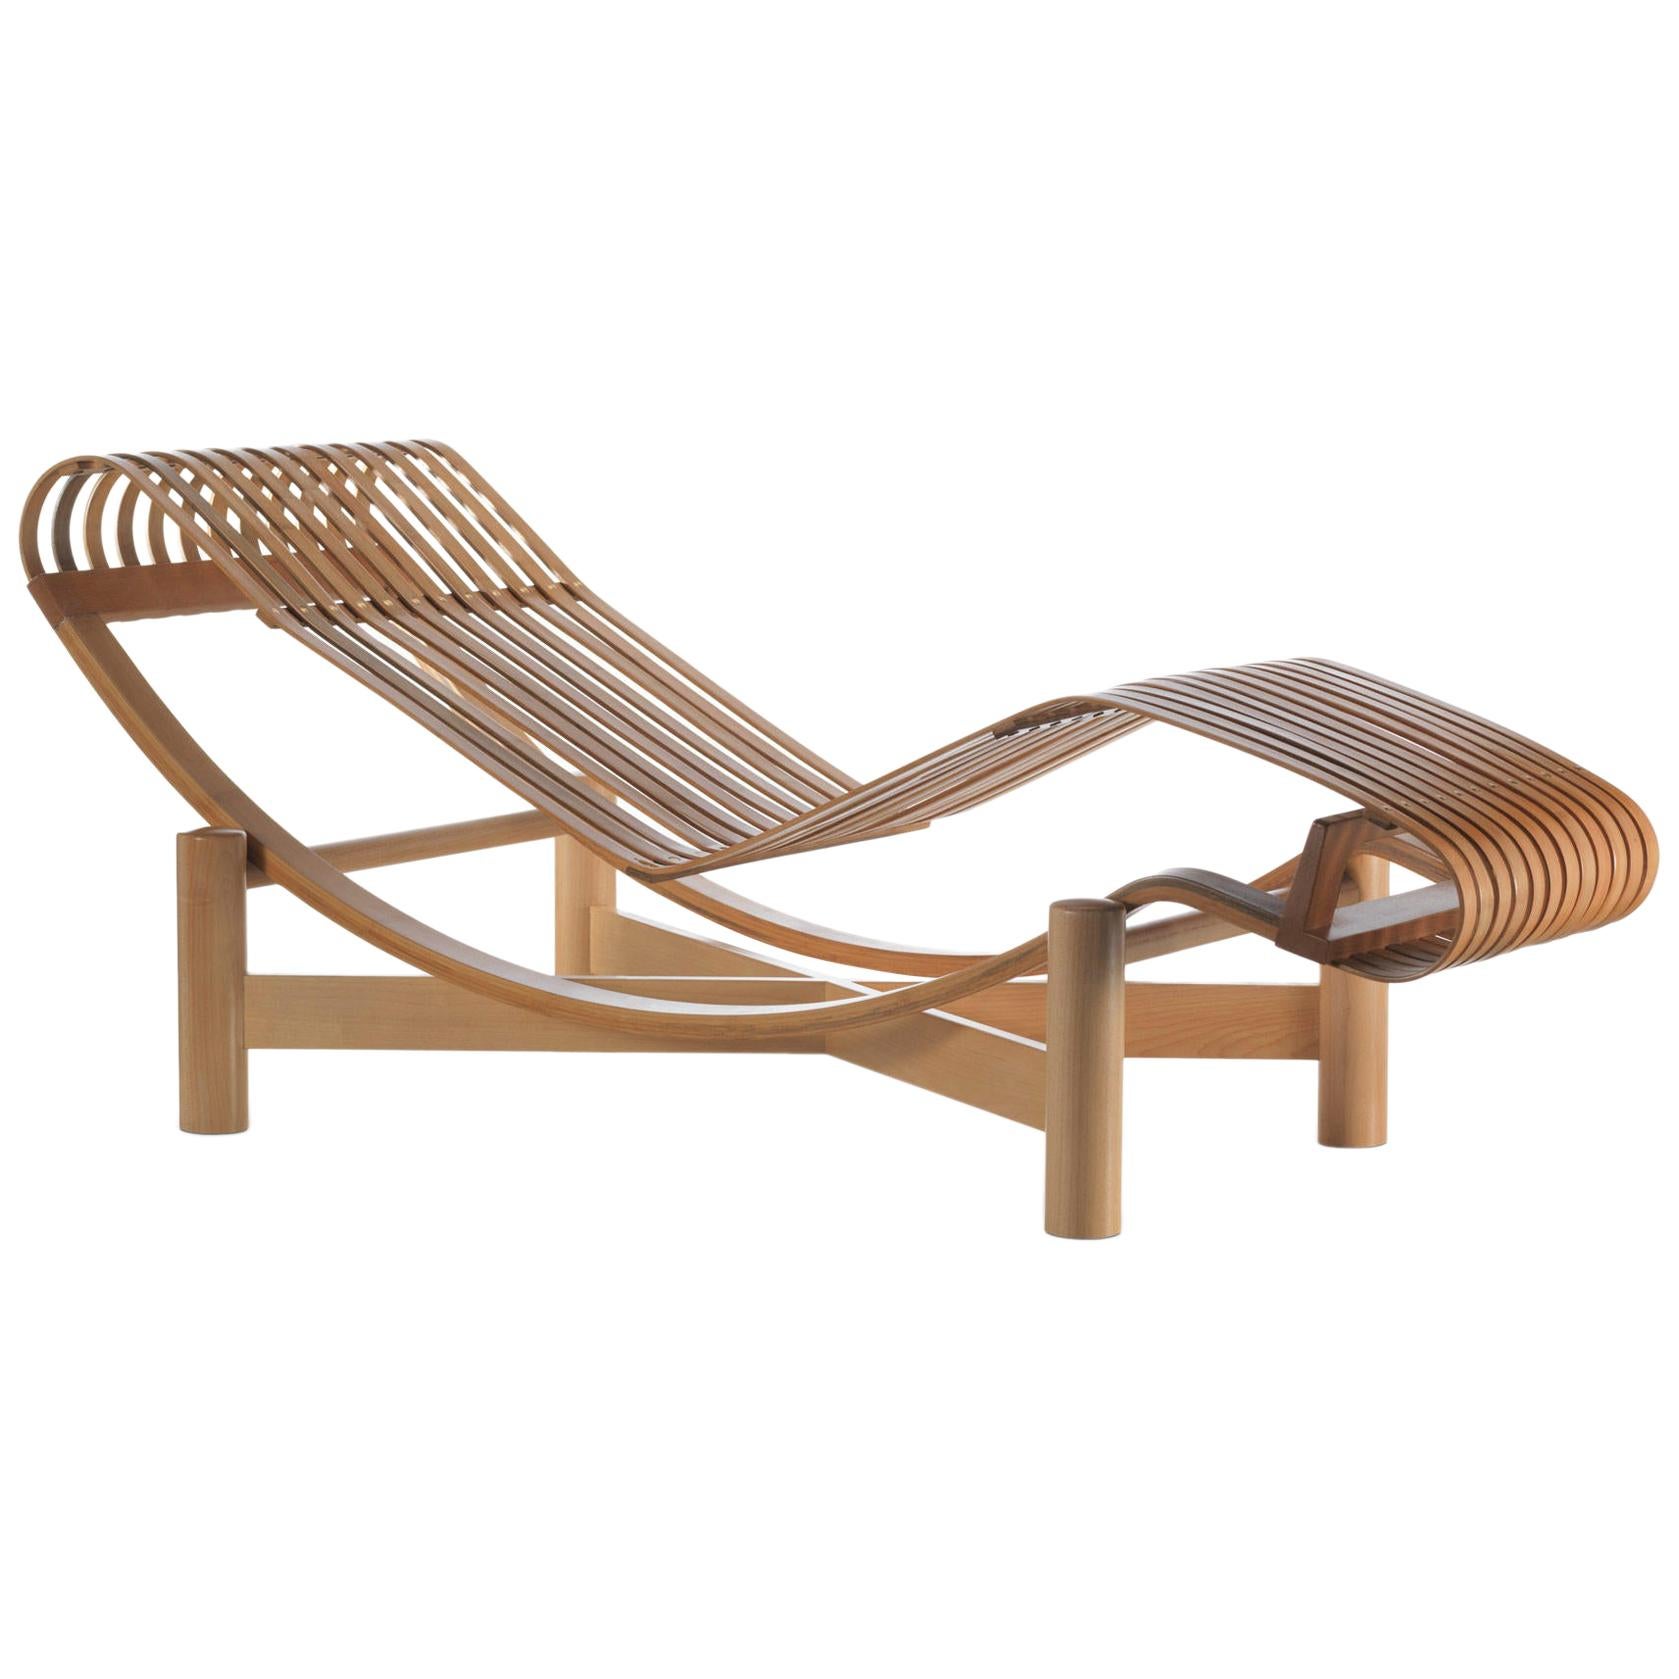 Charlotte Perriand Tokyo Chaise Longue by Cassina